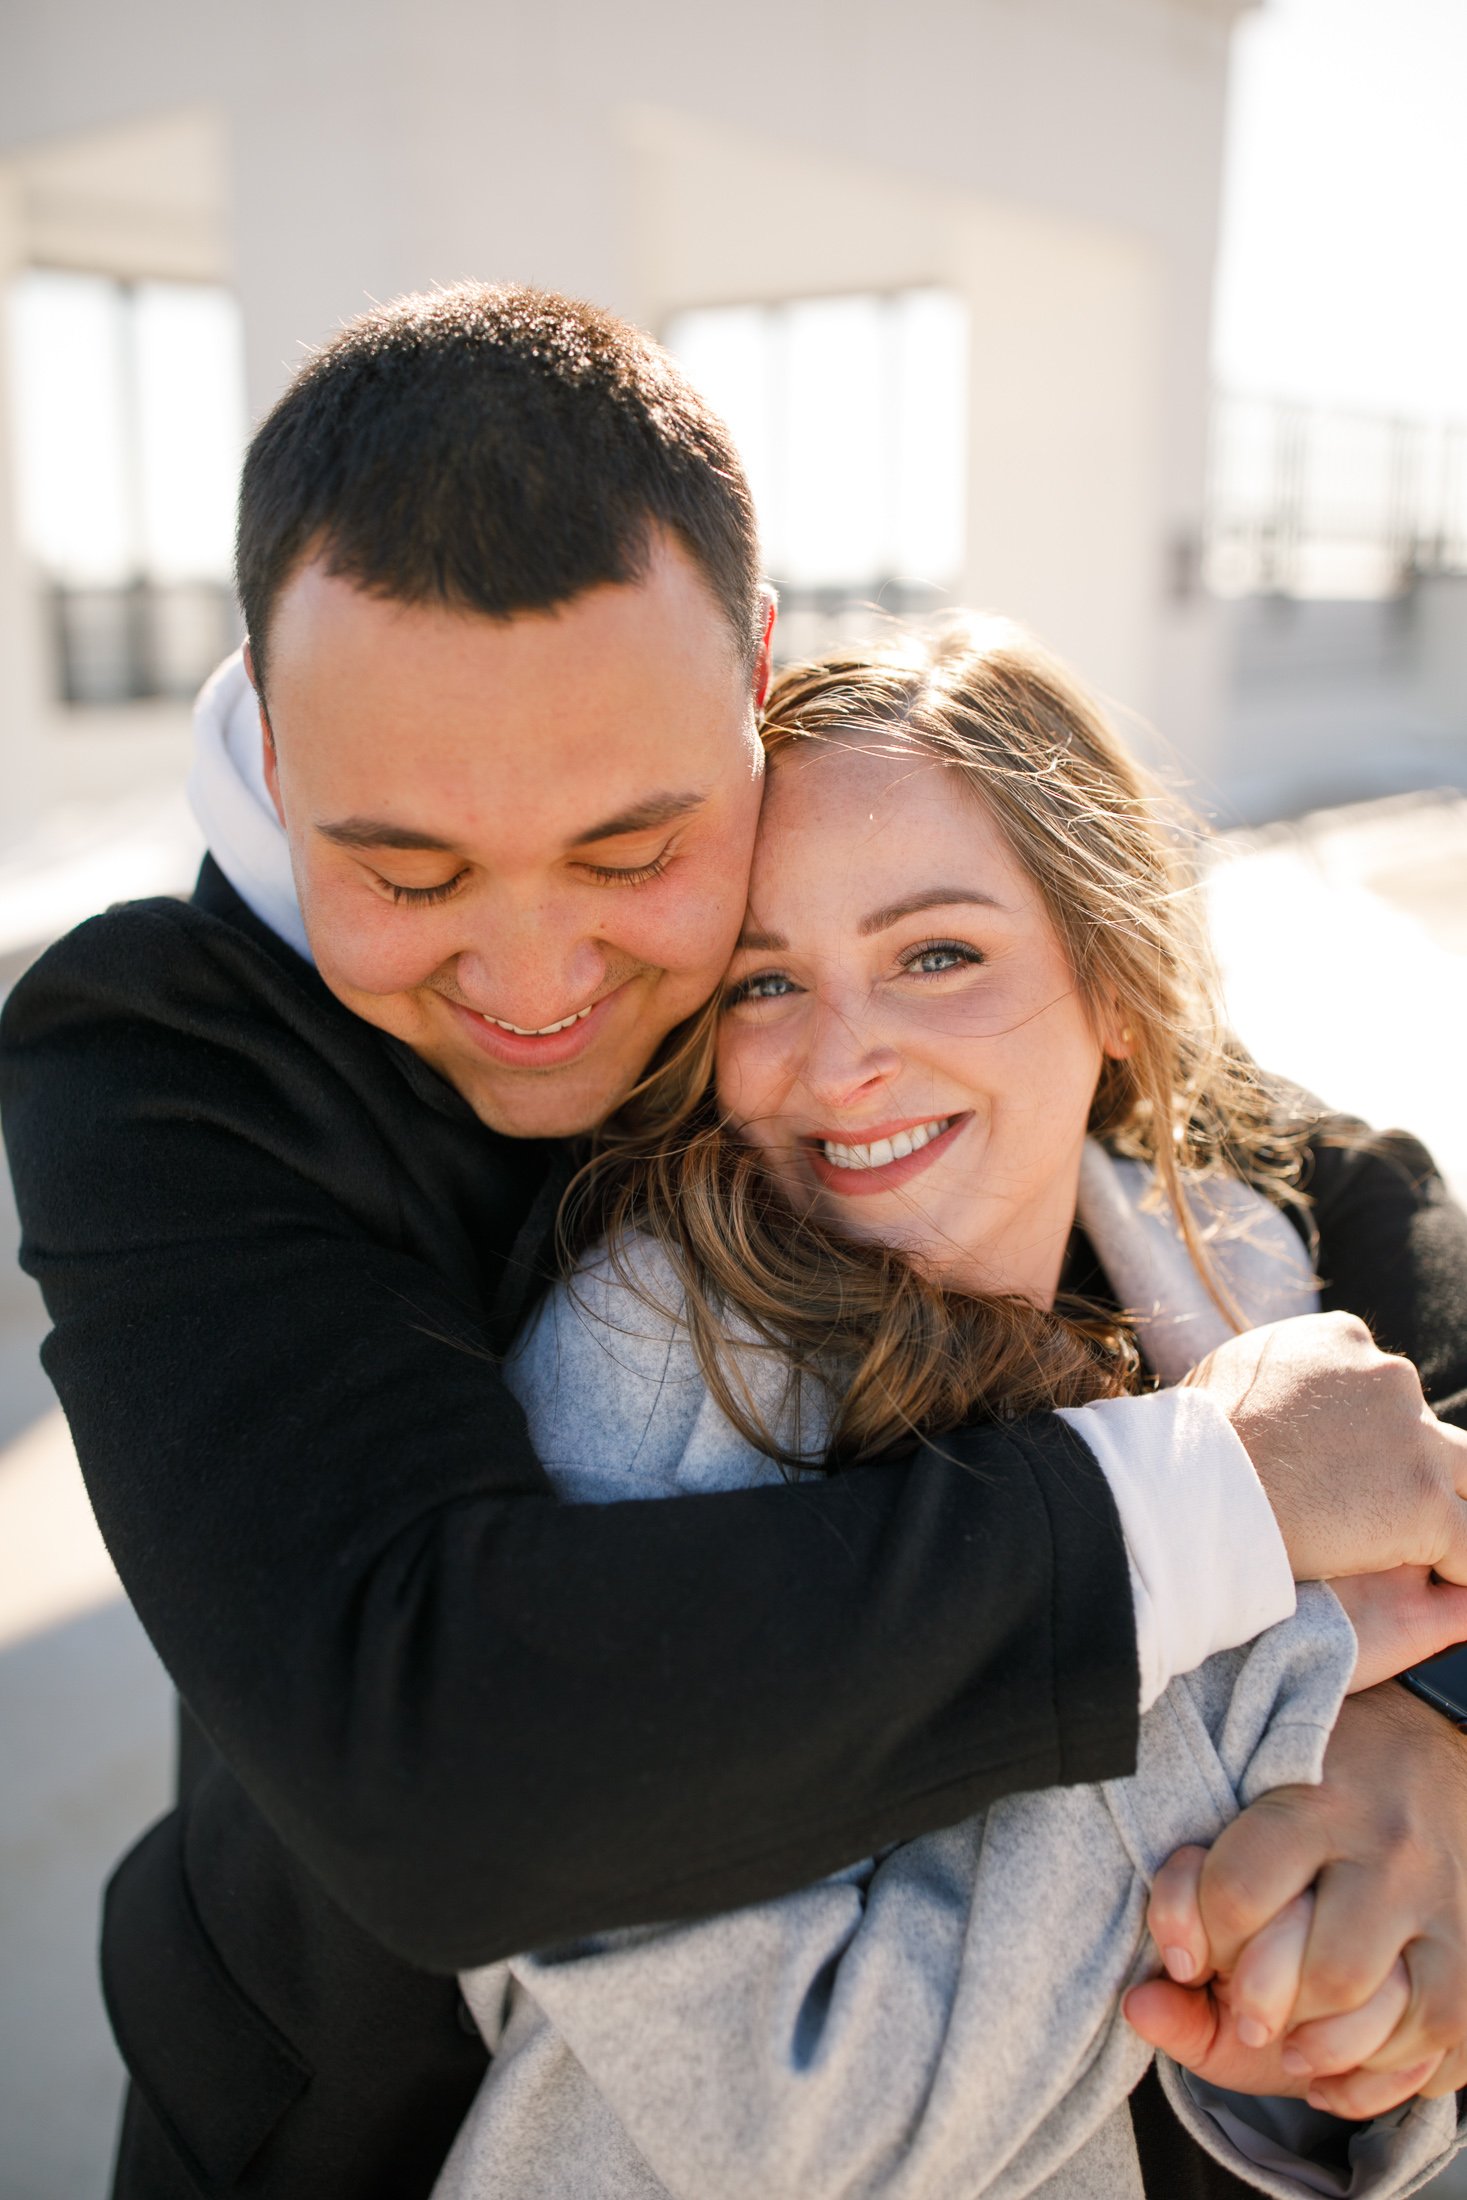 Danielle and Anthony - Grand Rapids Engagement Session - Grand Rapids Wedding Photographer - West Michigan Wedding Photographer Jessica Darling - J Darling Photo_050.jpg